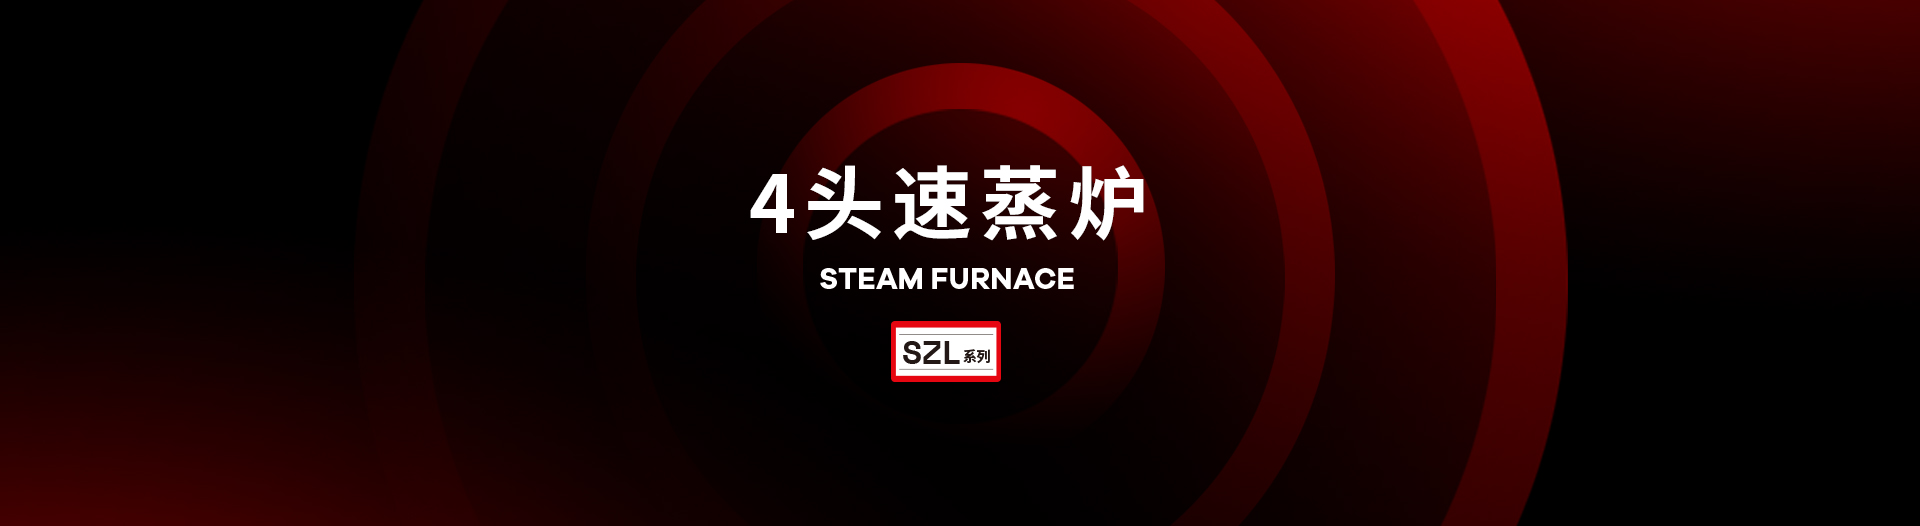 sinswey_engineering_product_steam_furnace_details_page_banner.jpg